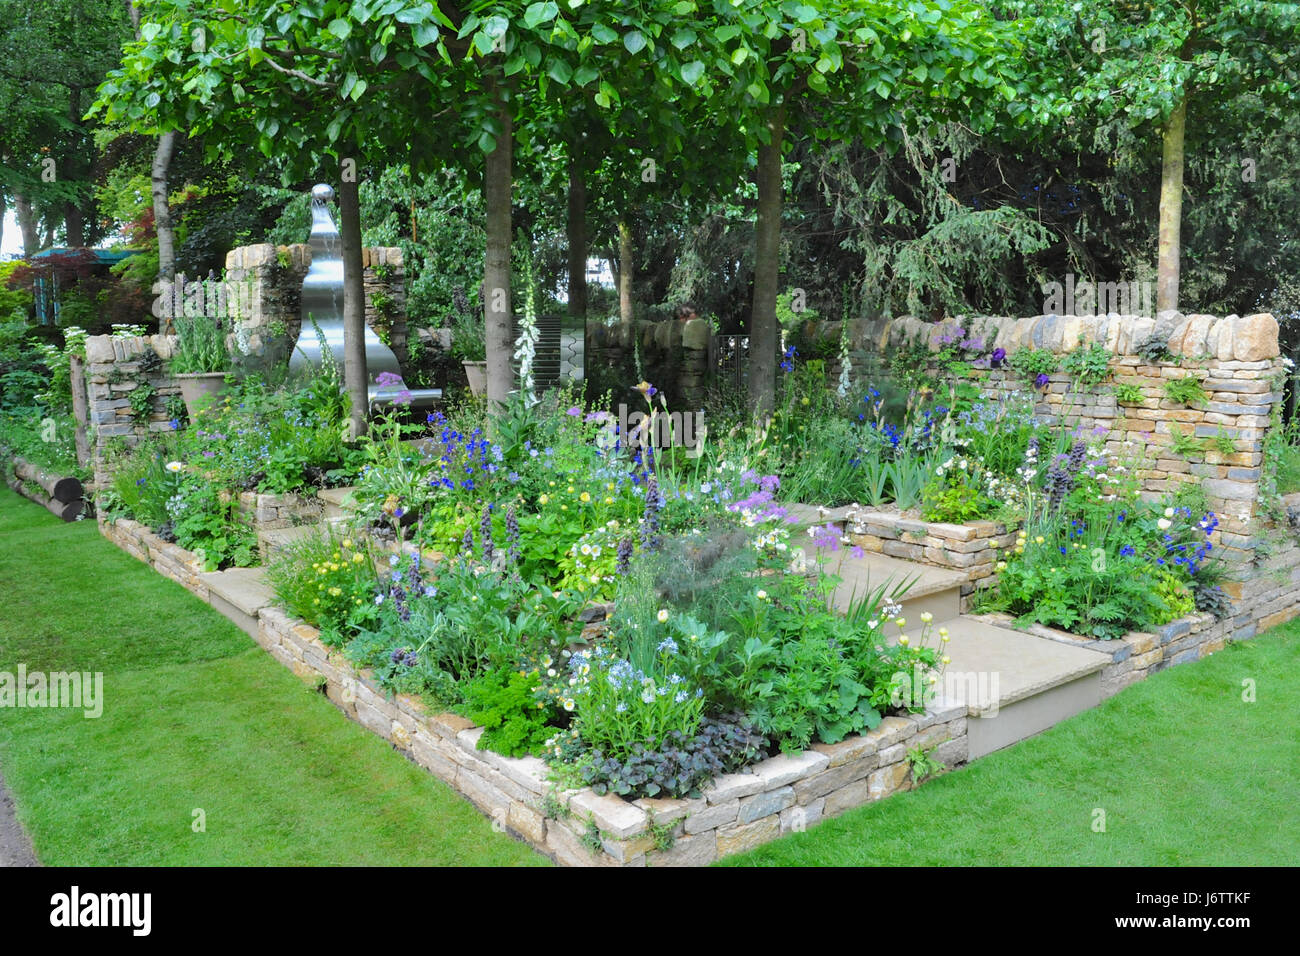 London, UK. 22nd May, 2017. The Poetry Lover's Garden (designed by Fiona Cadwallader), one of the nine beautiful and elegant Artisan gardens on display at the 2017 RHS Chelsea Flower Show which opened today, London, UK.  Artisan gardens revitalise traditional designs, materials and methods with new approaches to craft and craftsmanship. Representing some of the most imaginative and inspiring designs, these smaller gardens put a modern twist on timeless rustic ideas. Credit: Michael Preston/Alamy Live News Stock Photo